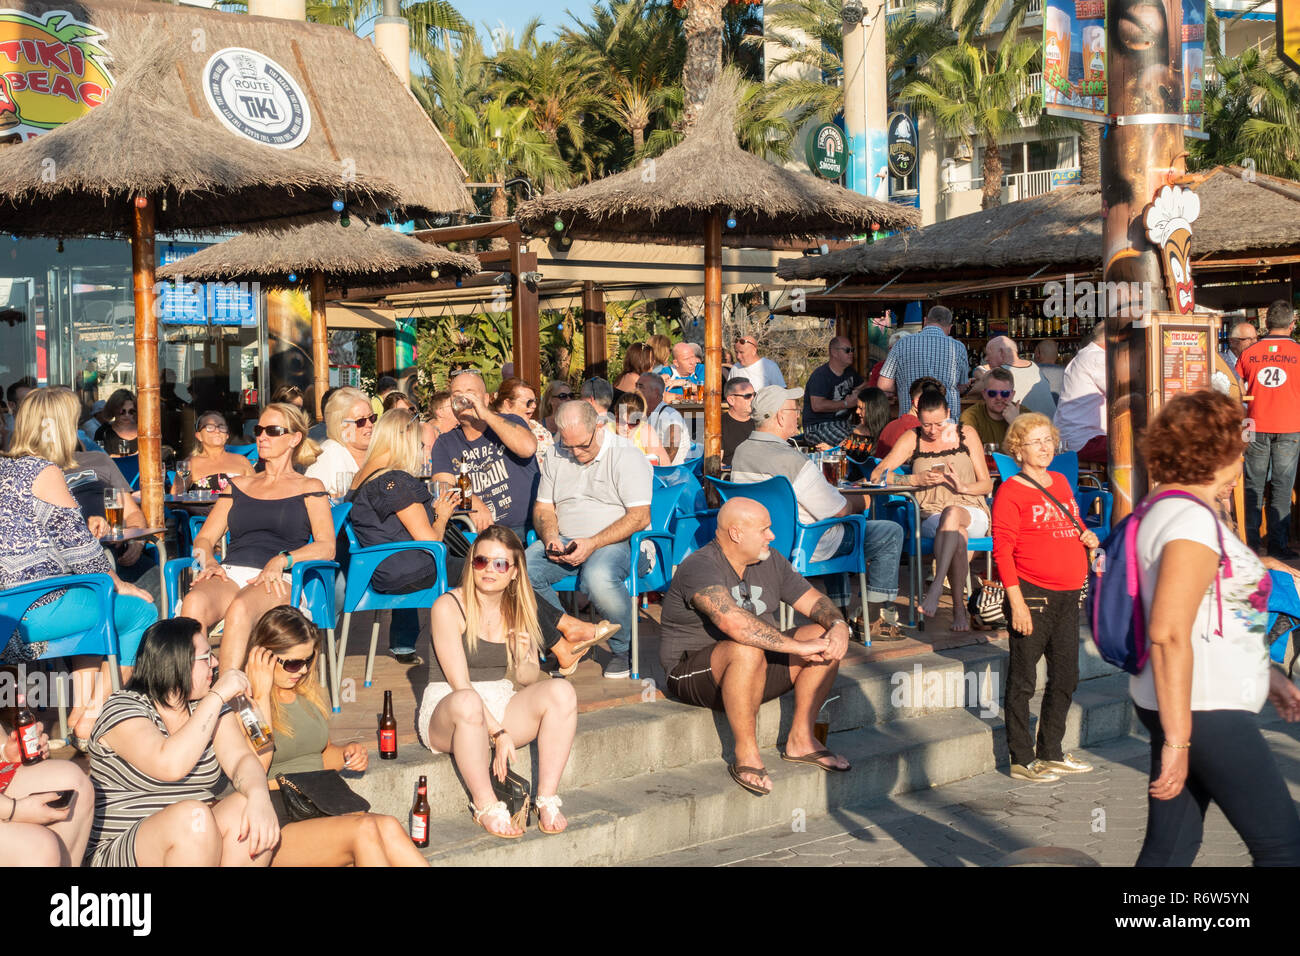 Benidorm, Costa Blanca, Spain. Drinkers enjoy high winter temperatures at the Tiki Beach bar on Levante beach has now been refurbished and reopened Stock Photo